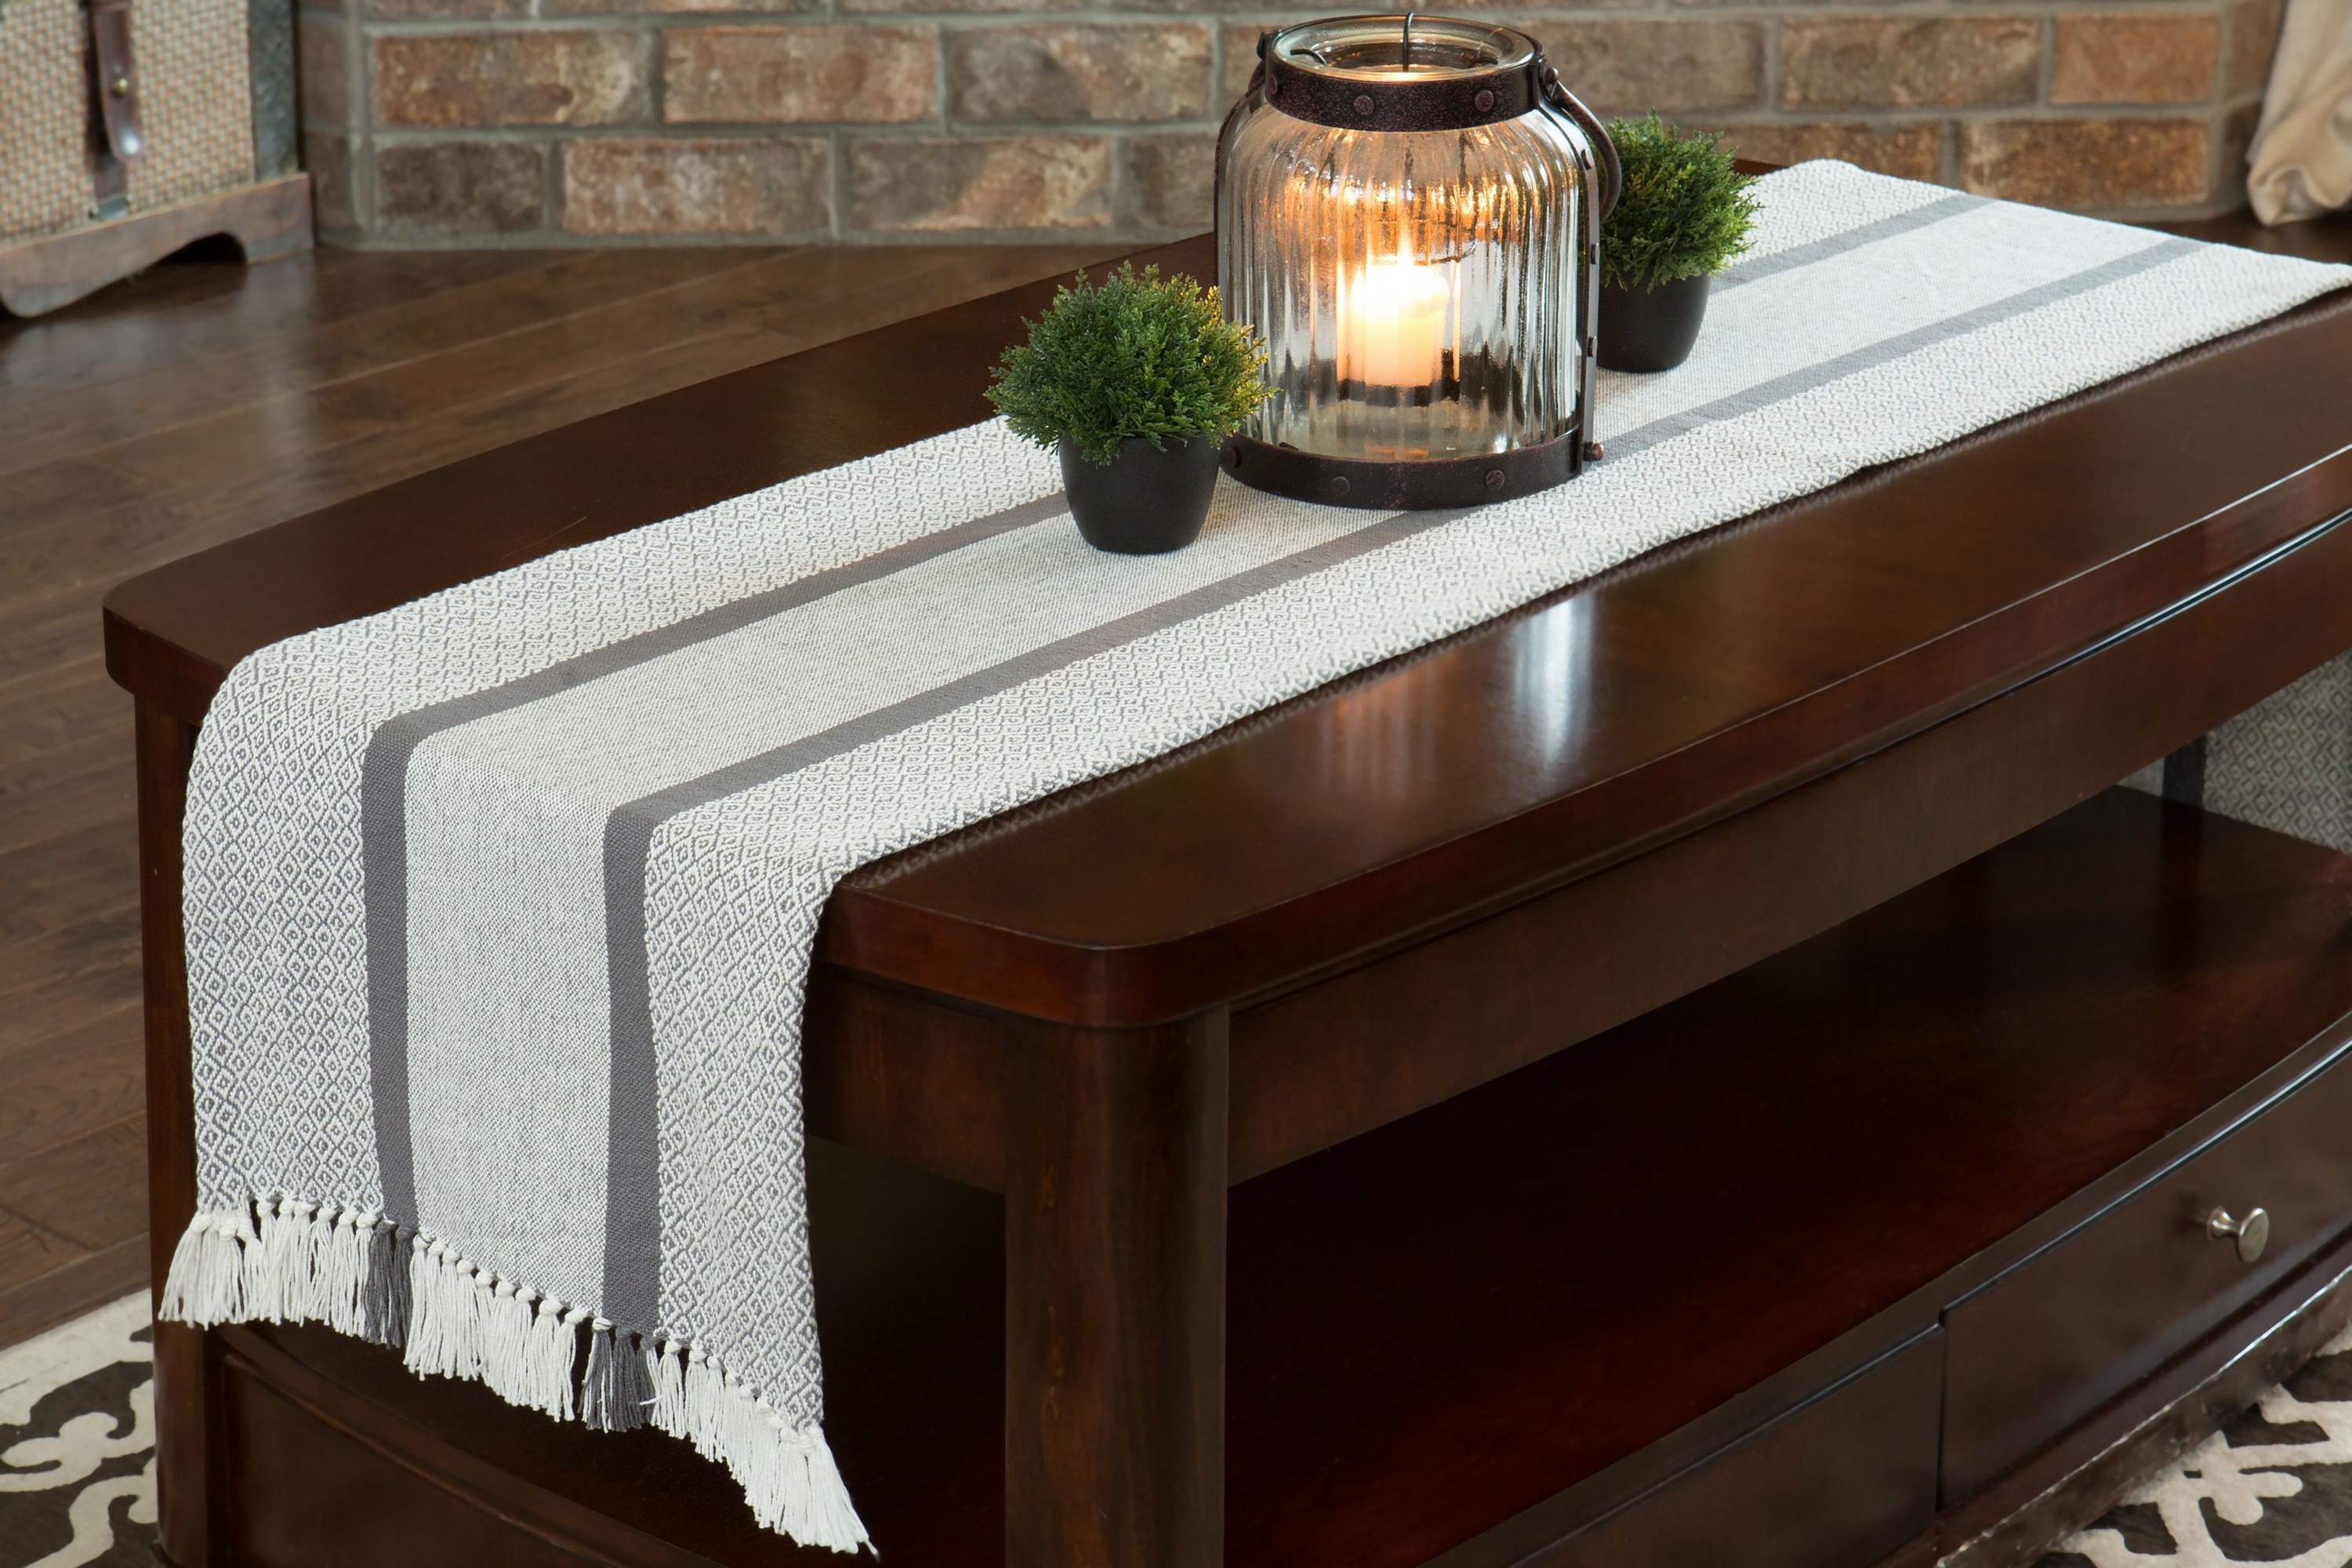 The table runner in the color Gray